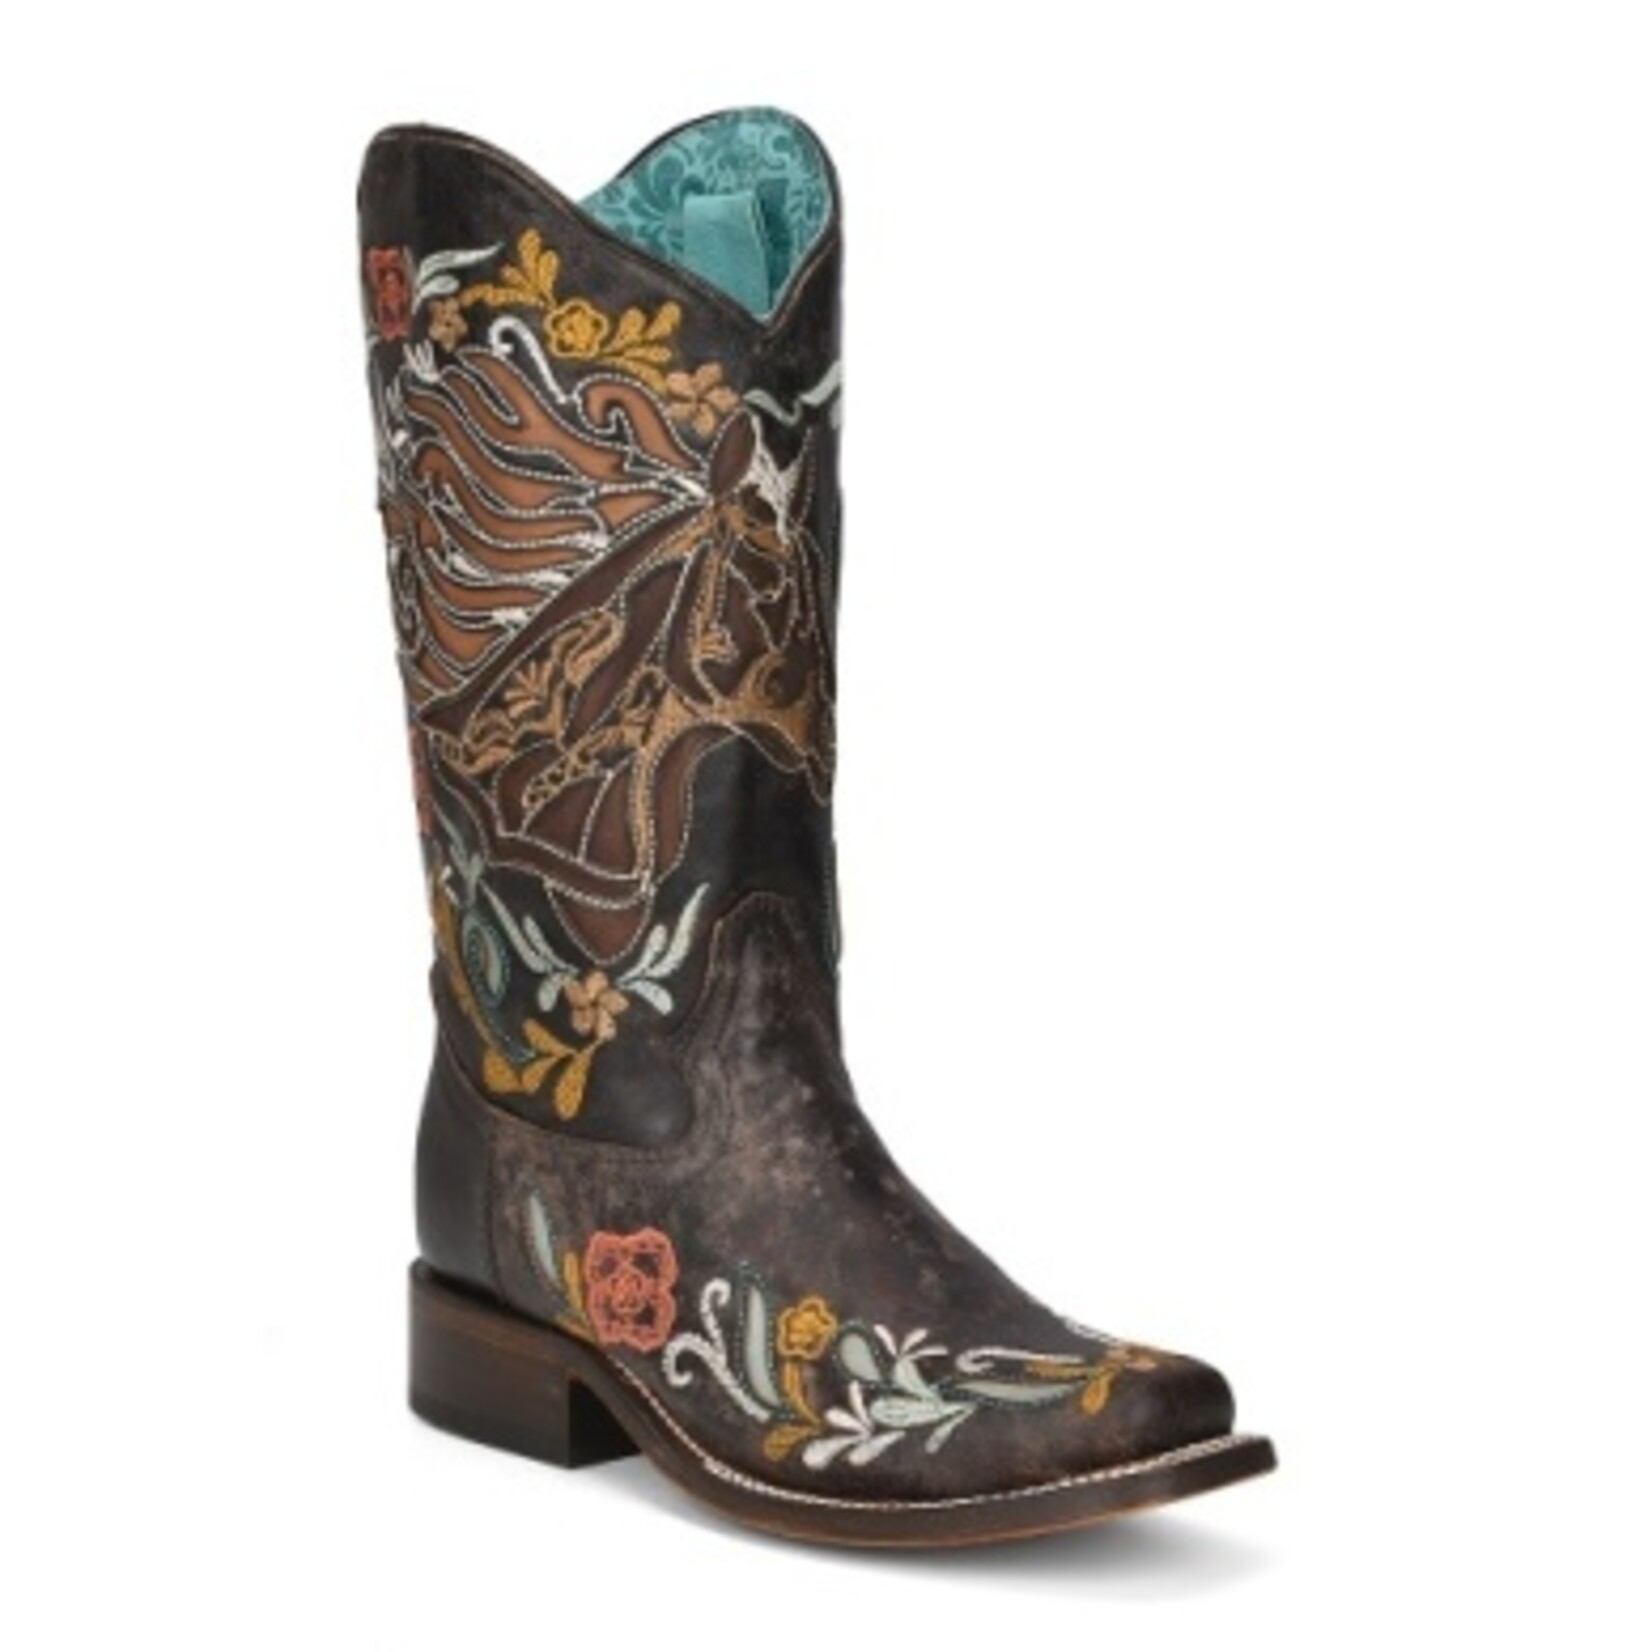 Corral Boots Corral Boots Ladies Dark Brown Horse Inlay Iridescent